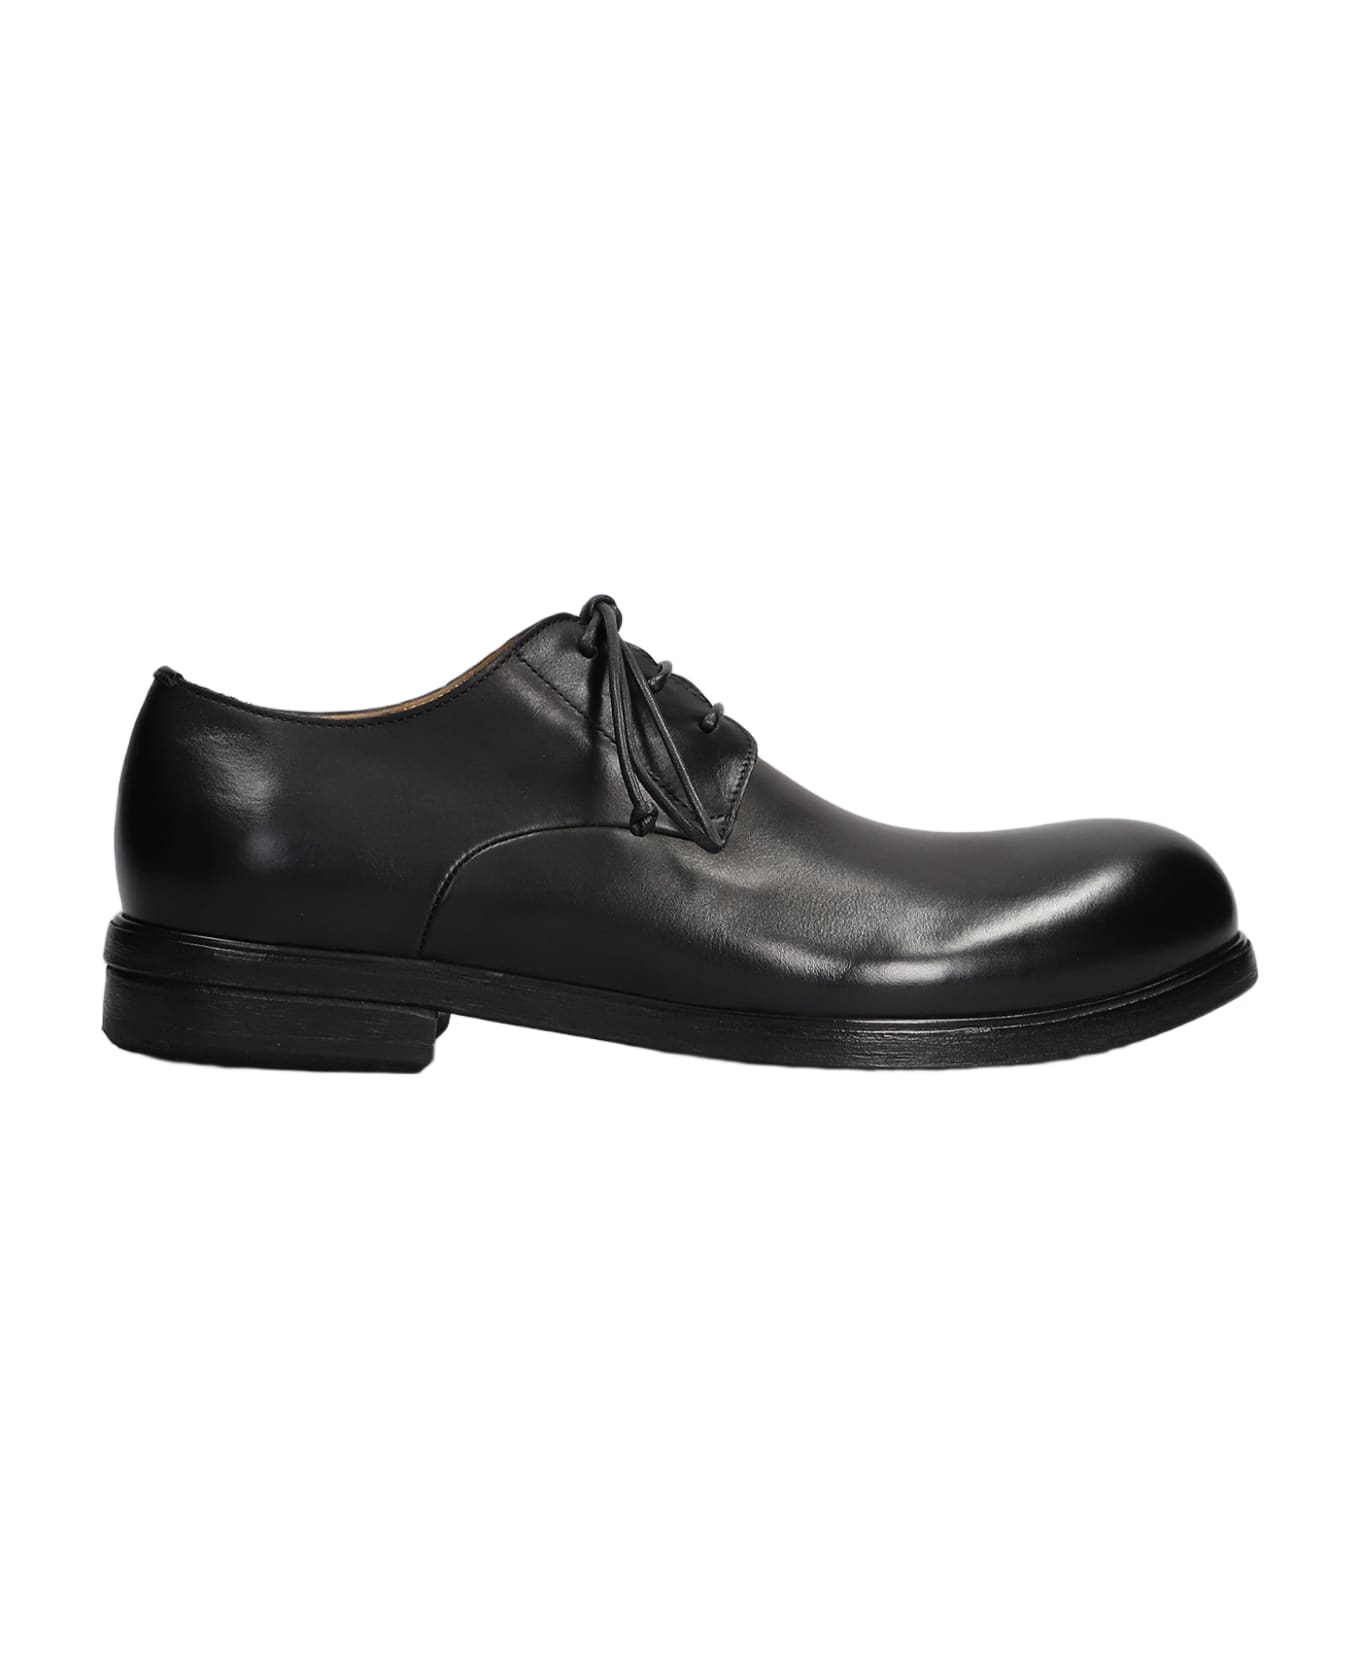 Marsell Lace Up Shoes In Black Leather - black